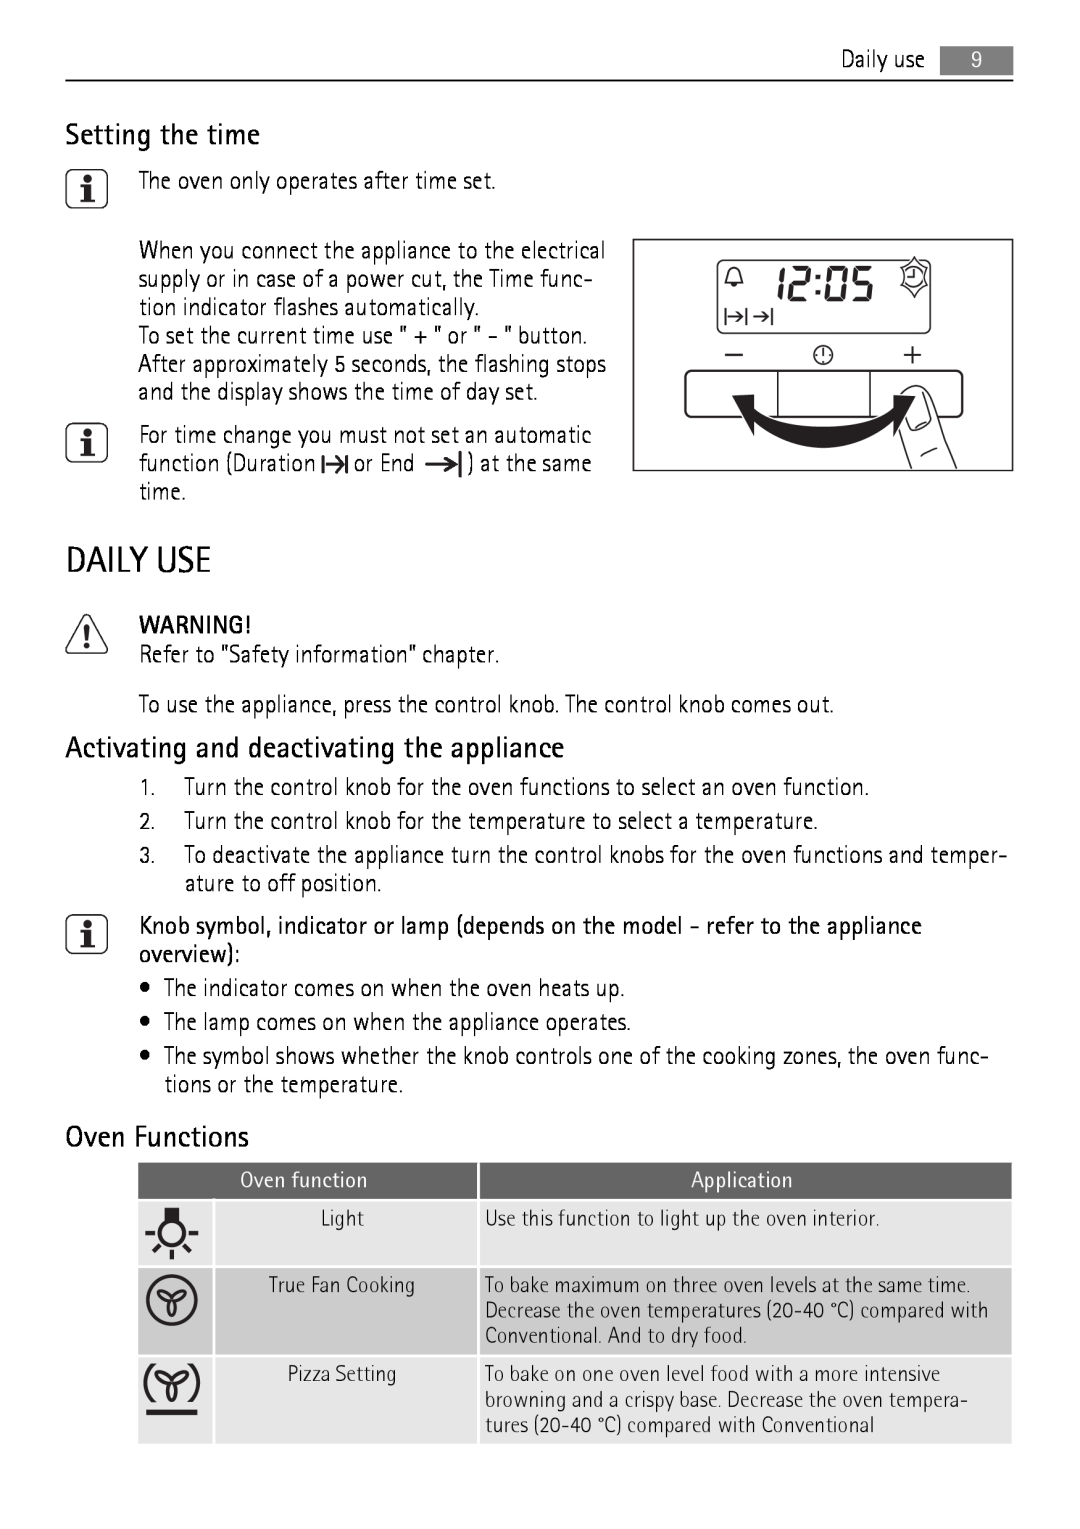 AEG BE3013021 user manual Daily Use, Setting the time, Activating and deactivating the appliance, Oven Functions 